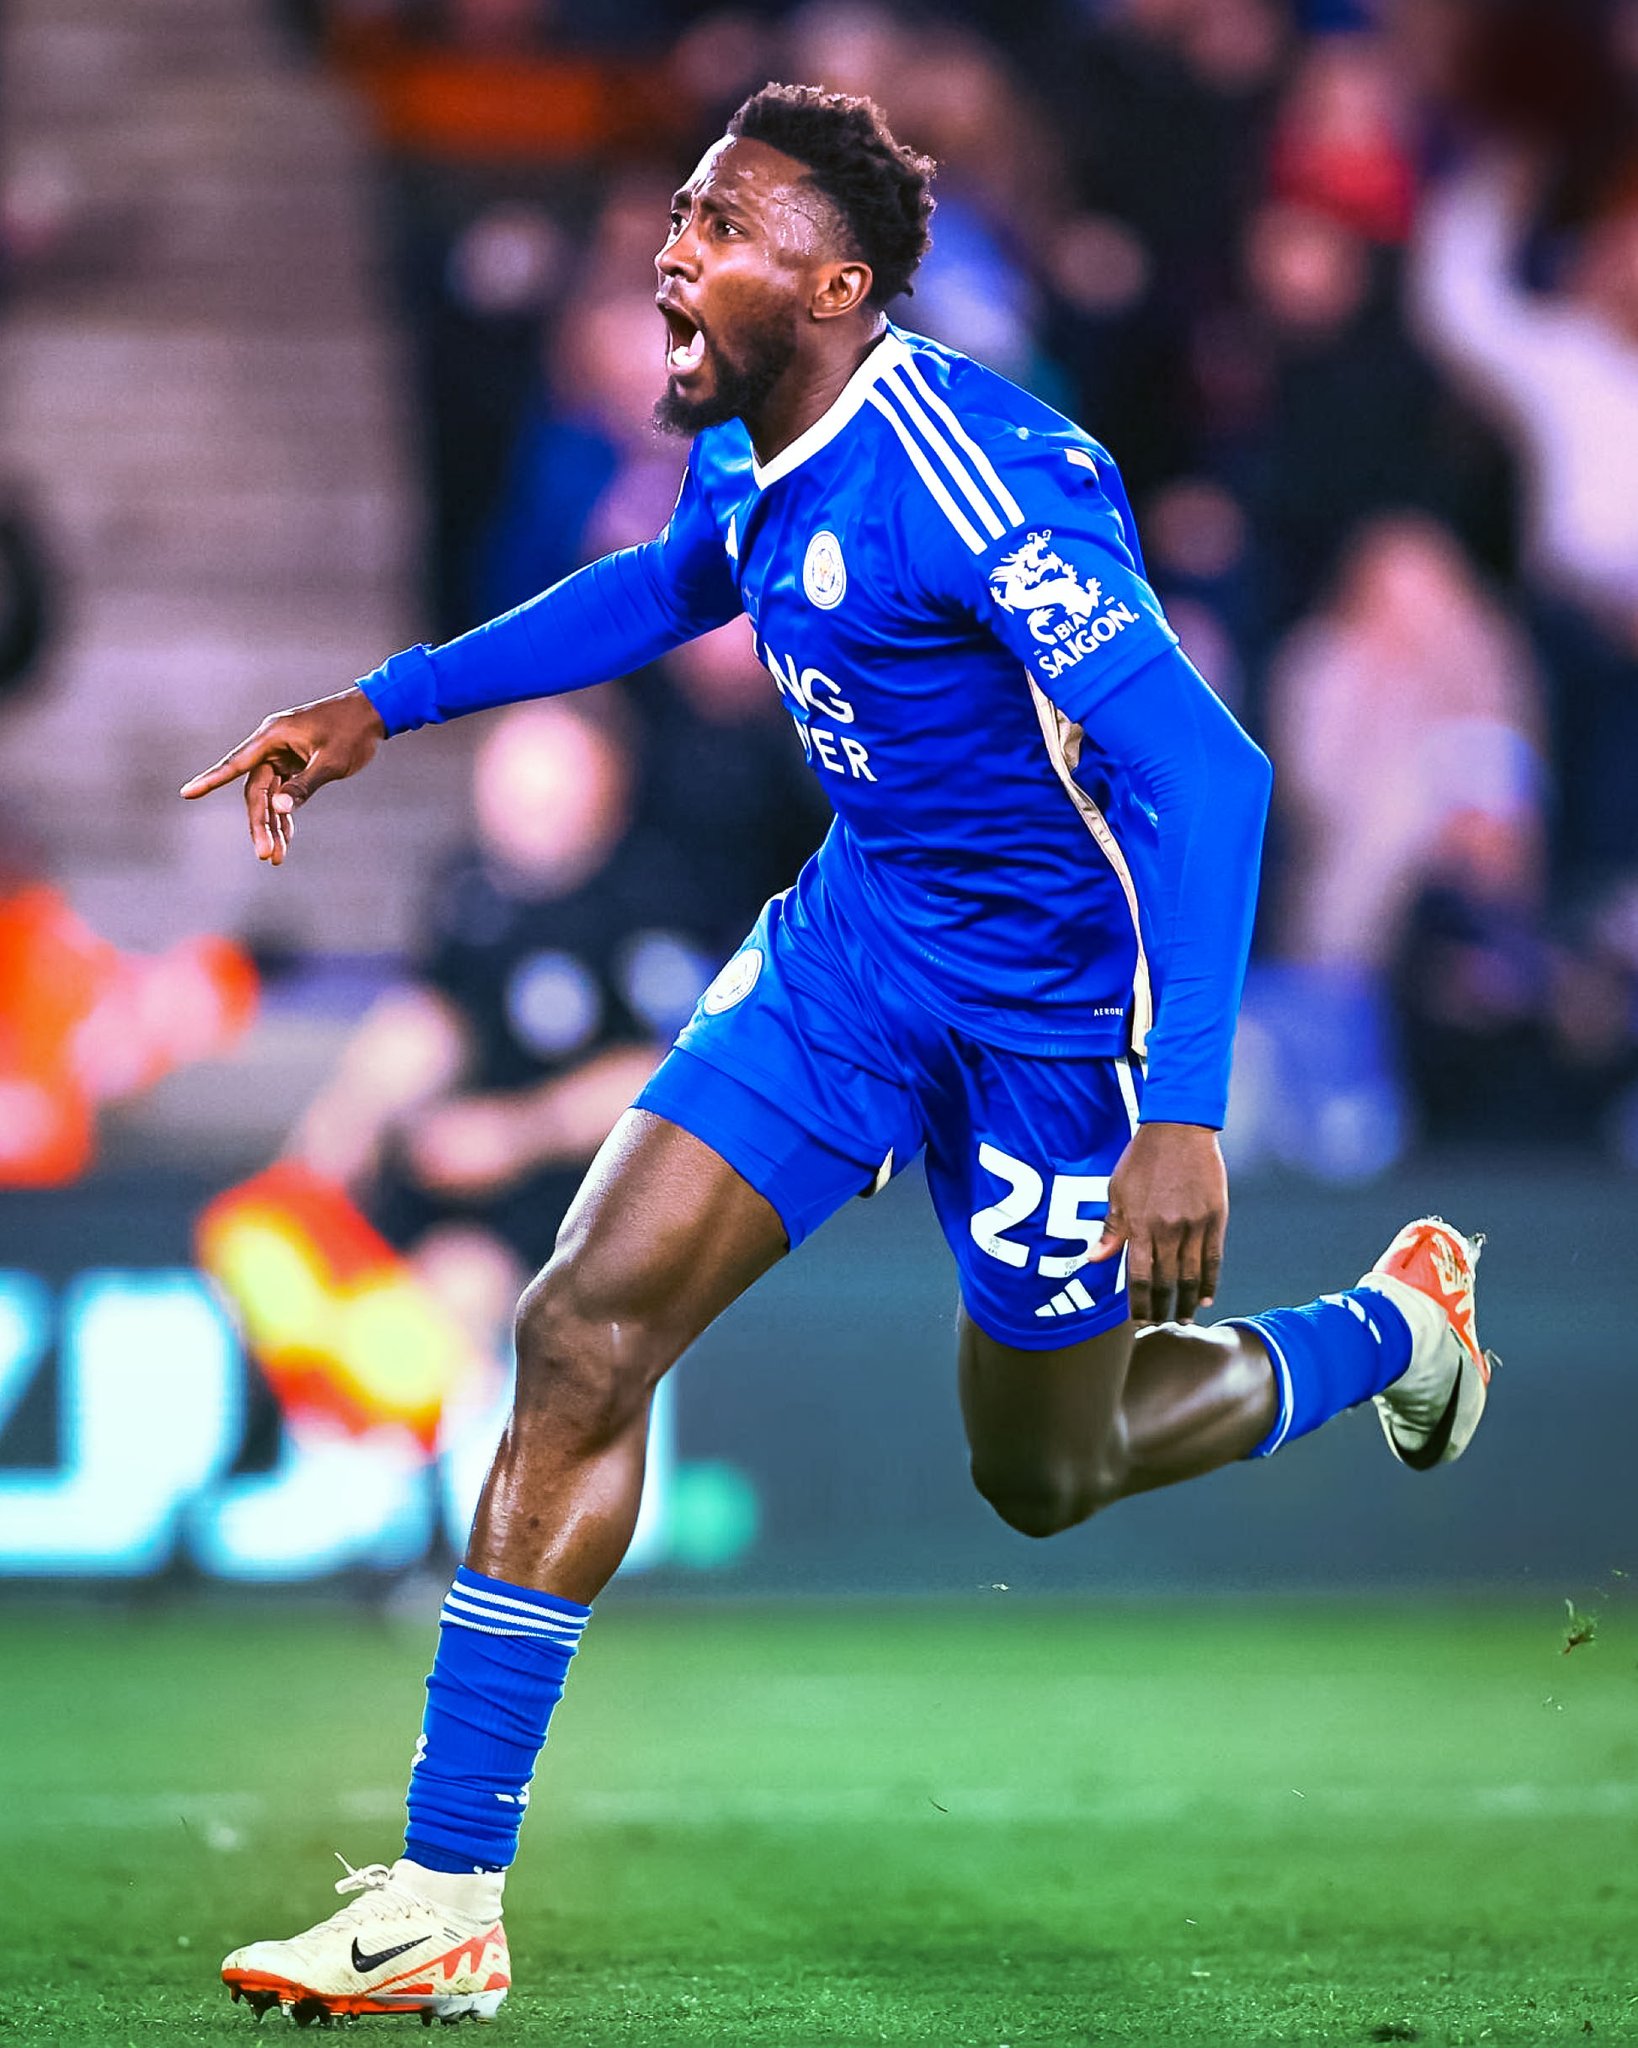 Consecutive goals for Ndidi in Leicester City's big win over Southampton